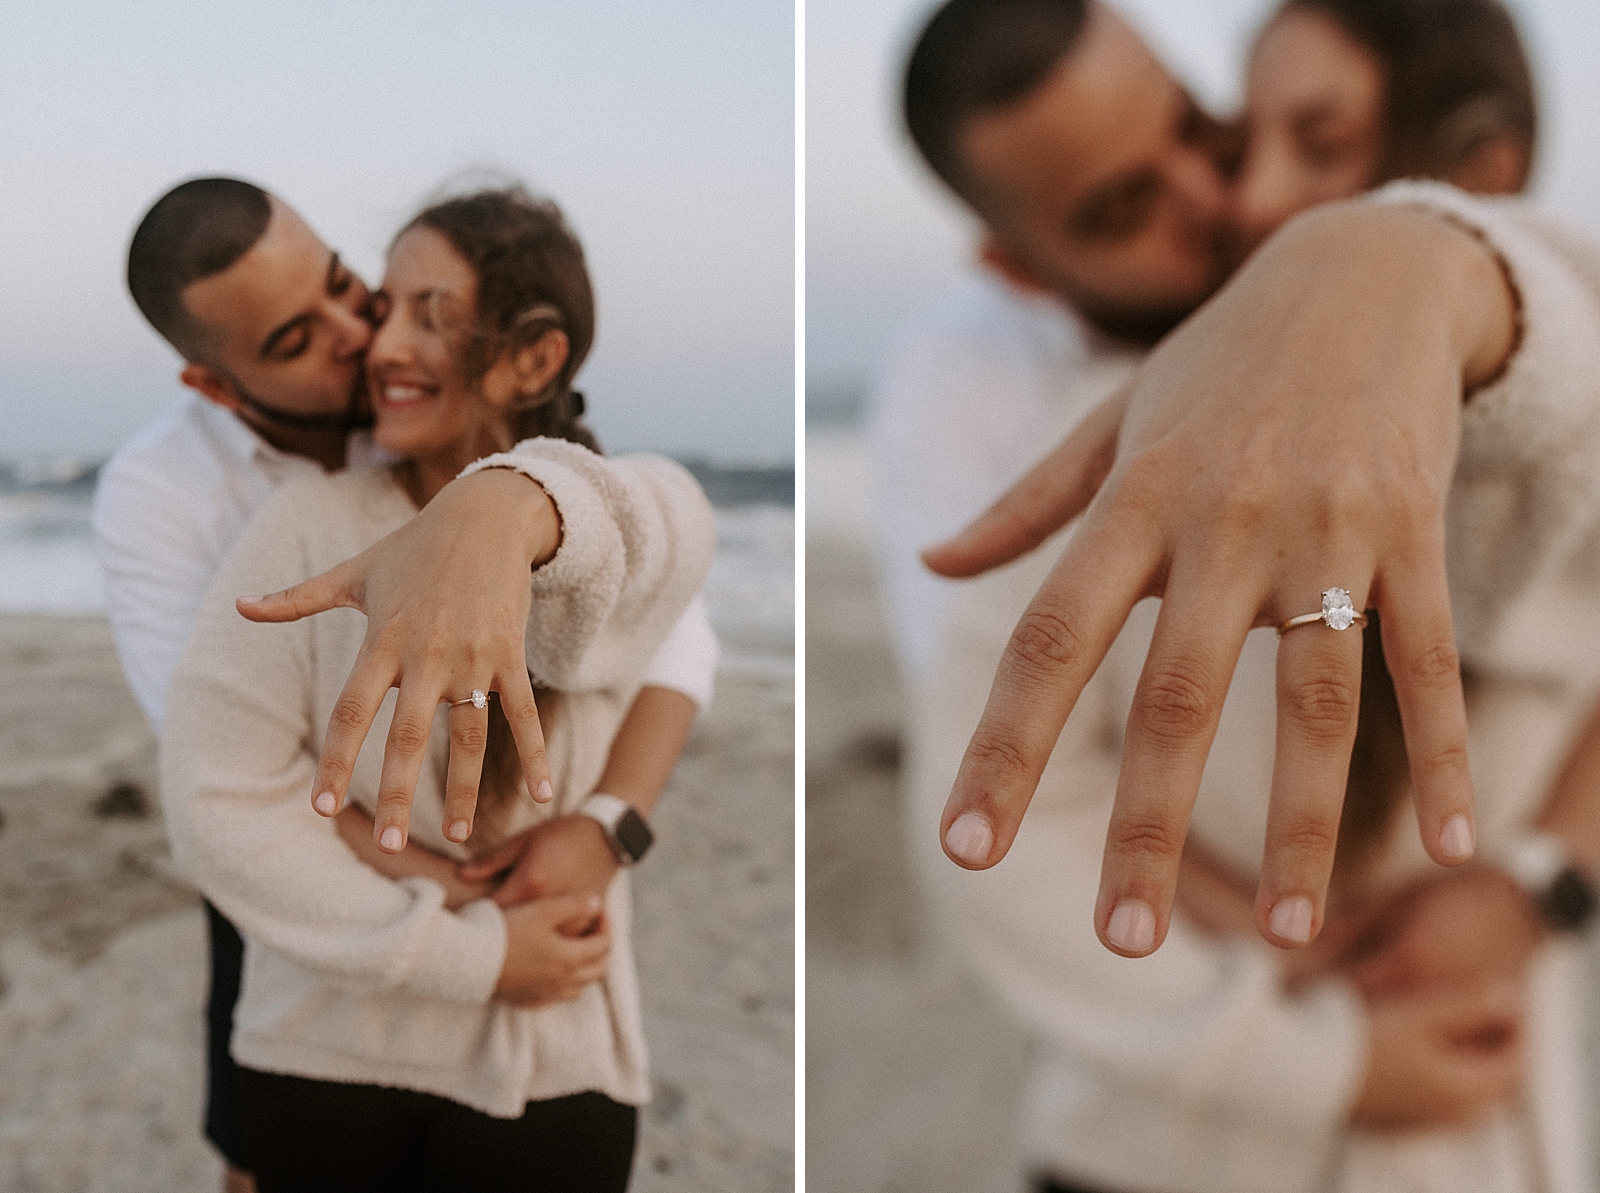 Man holding woman and her extending hand out showing off engagement ring